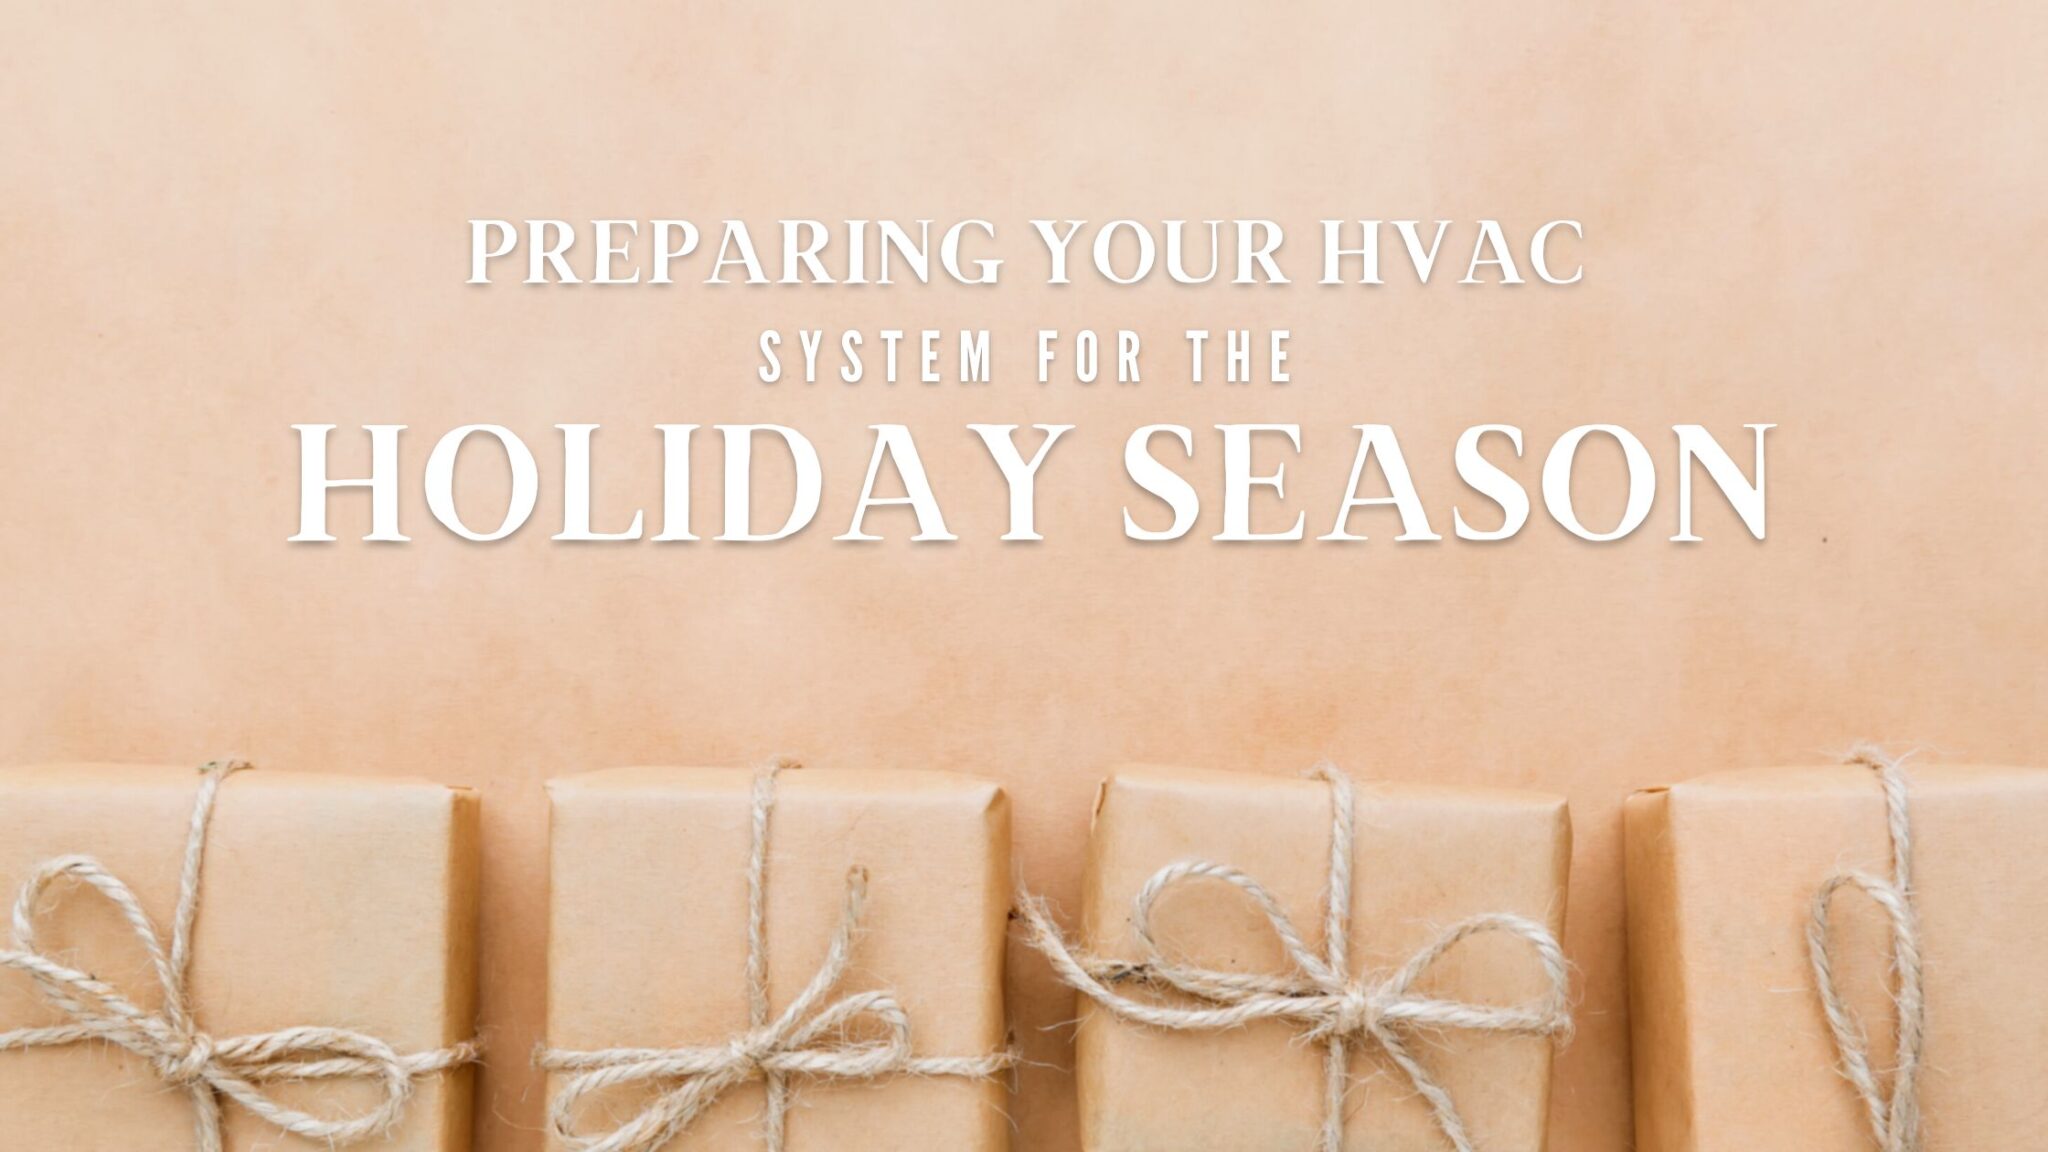 Preparing Your HVAC System for the Holiday Season